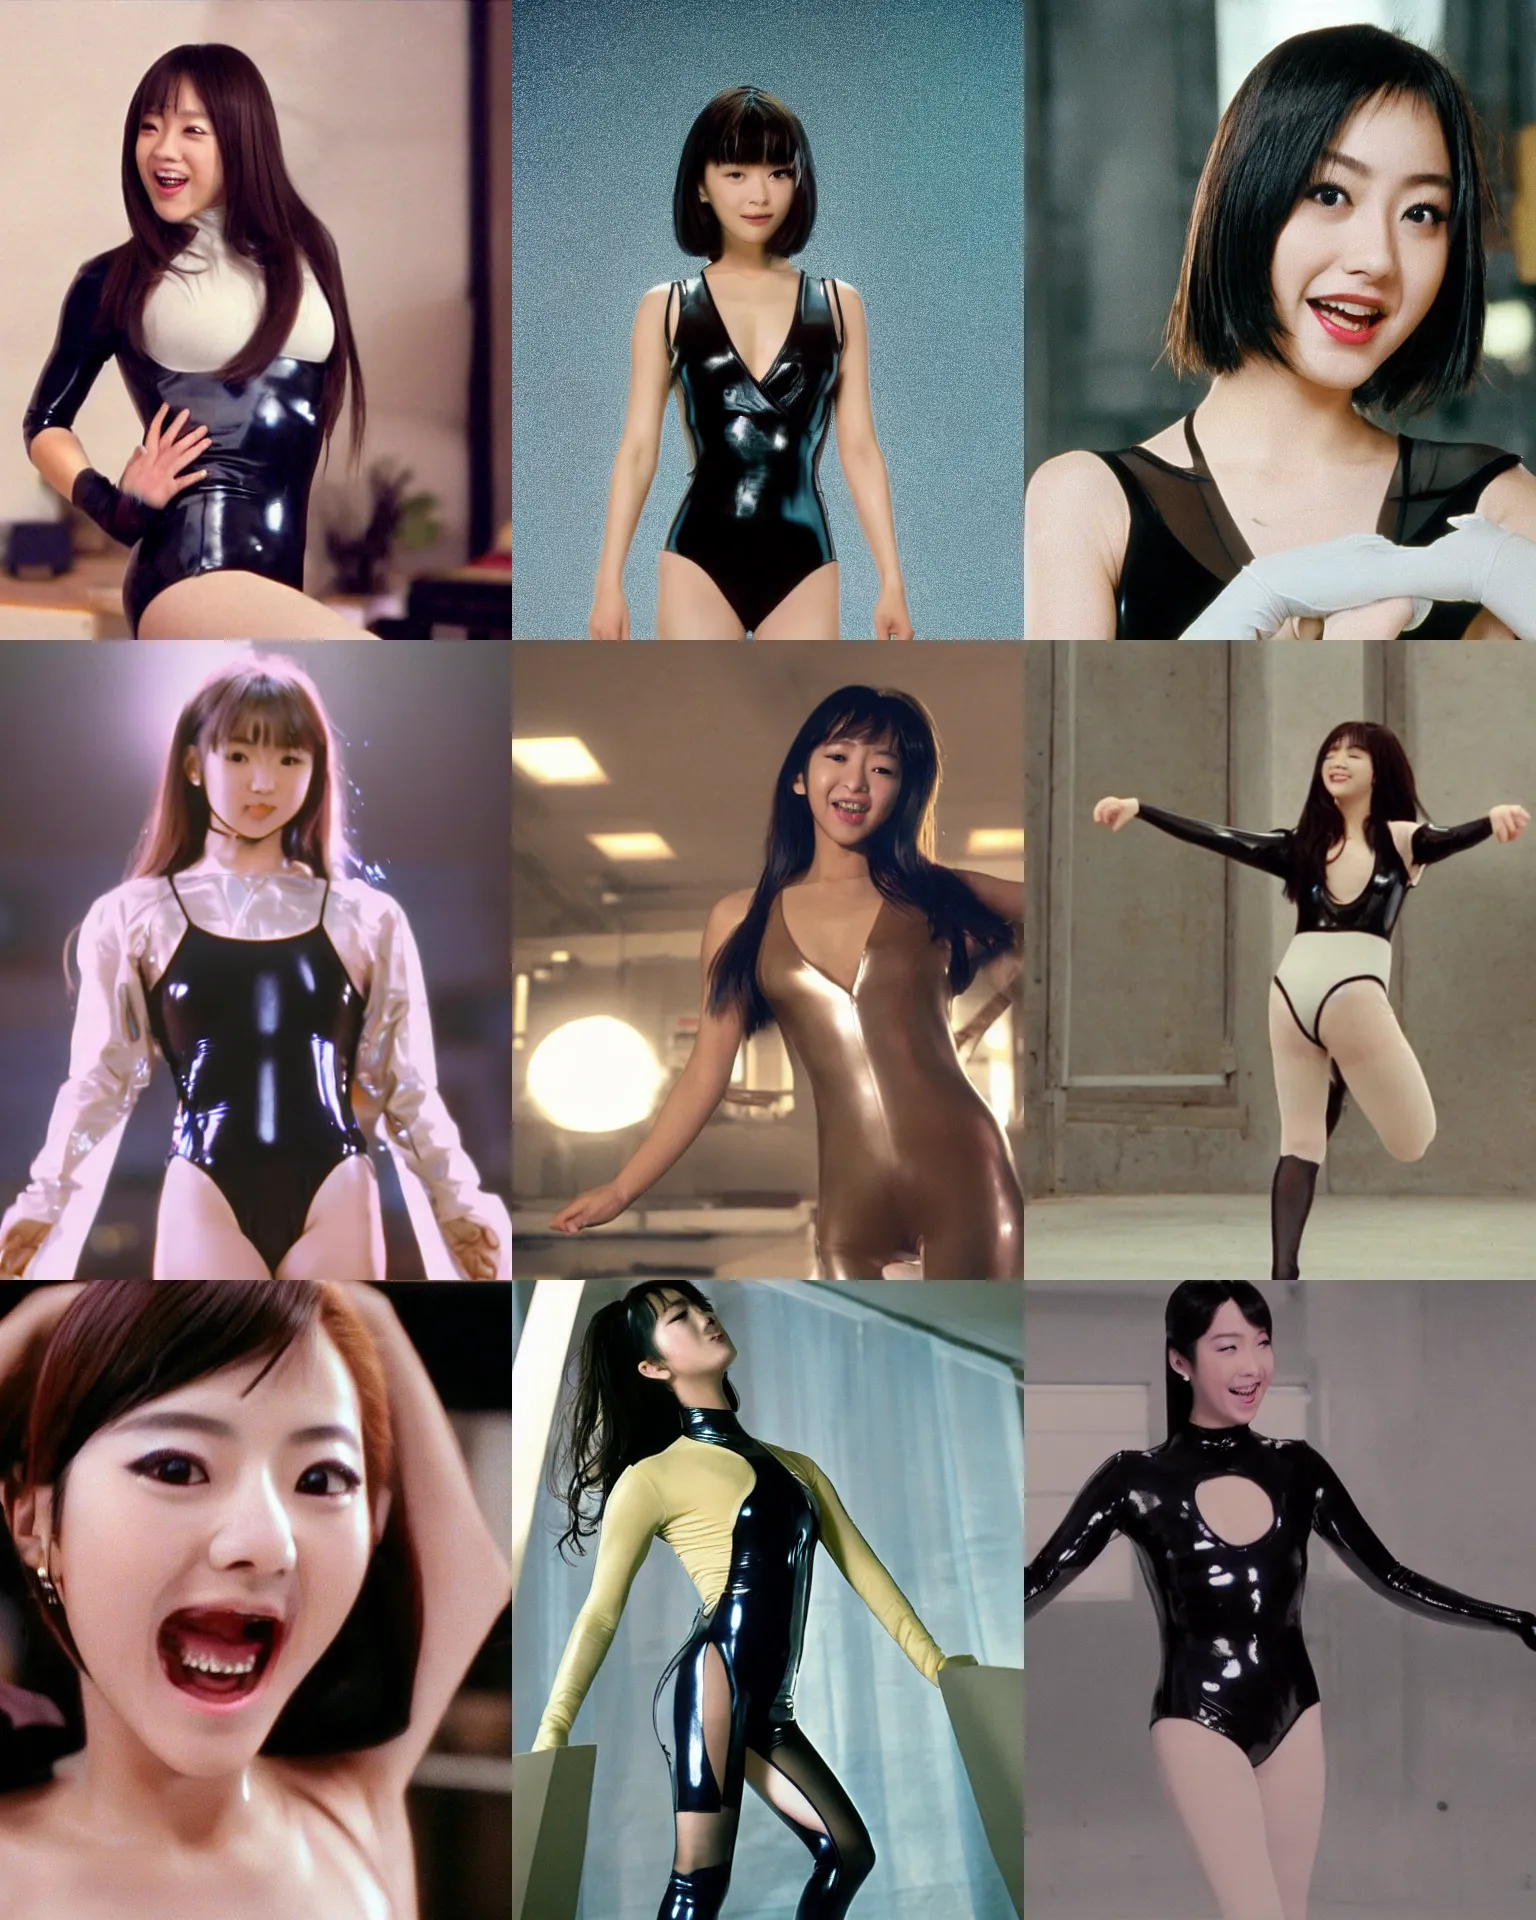 Prompt: Worksafe,clothed.1990s,unbelievably beautiful,perfect,dynamic,epic,cinematic movie shot of a close-up beautiful cute young J-Pop AV idol actress girl in latex leotard,expressing joy.By a Iranian movie director.Motion,VFX,Inspirational arthouse,high budget,hollywood style,at Behance,at Netflix,Instagram filters,Photoshop,Adobe Lightroom,Adobe After Effects,taken with polaroid kodak portra